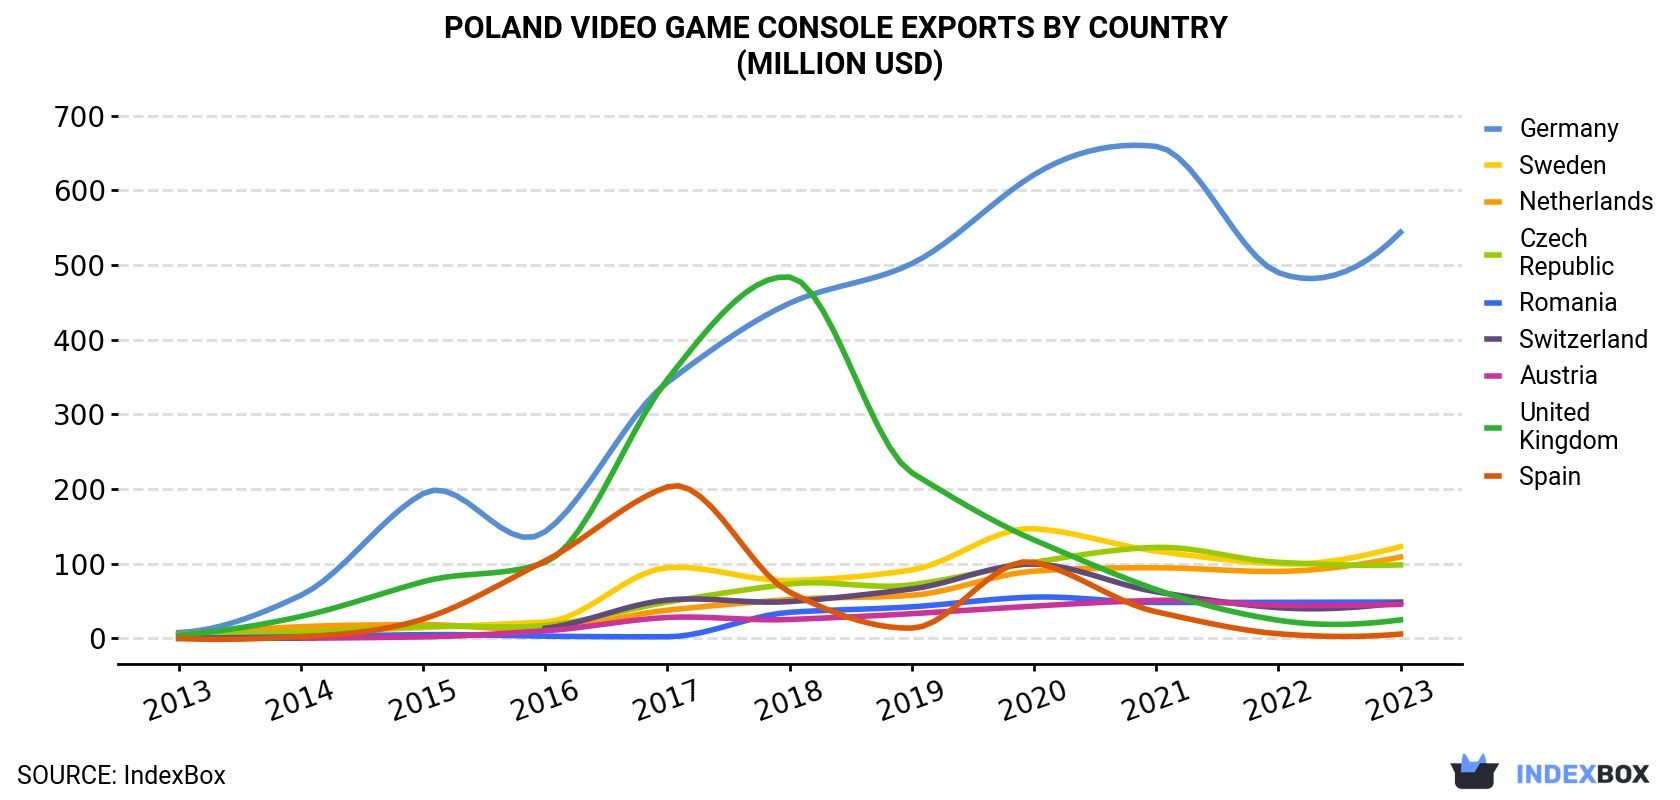 Poland Video Game Console Exports By Country (Million USD)